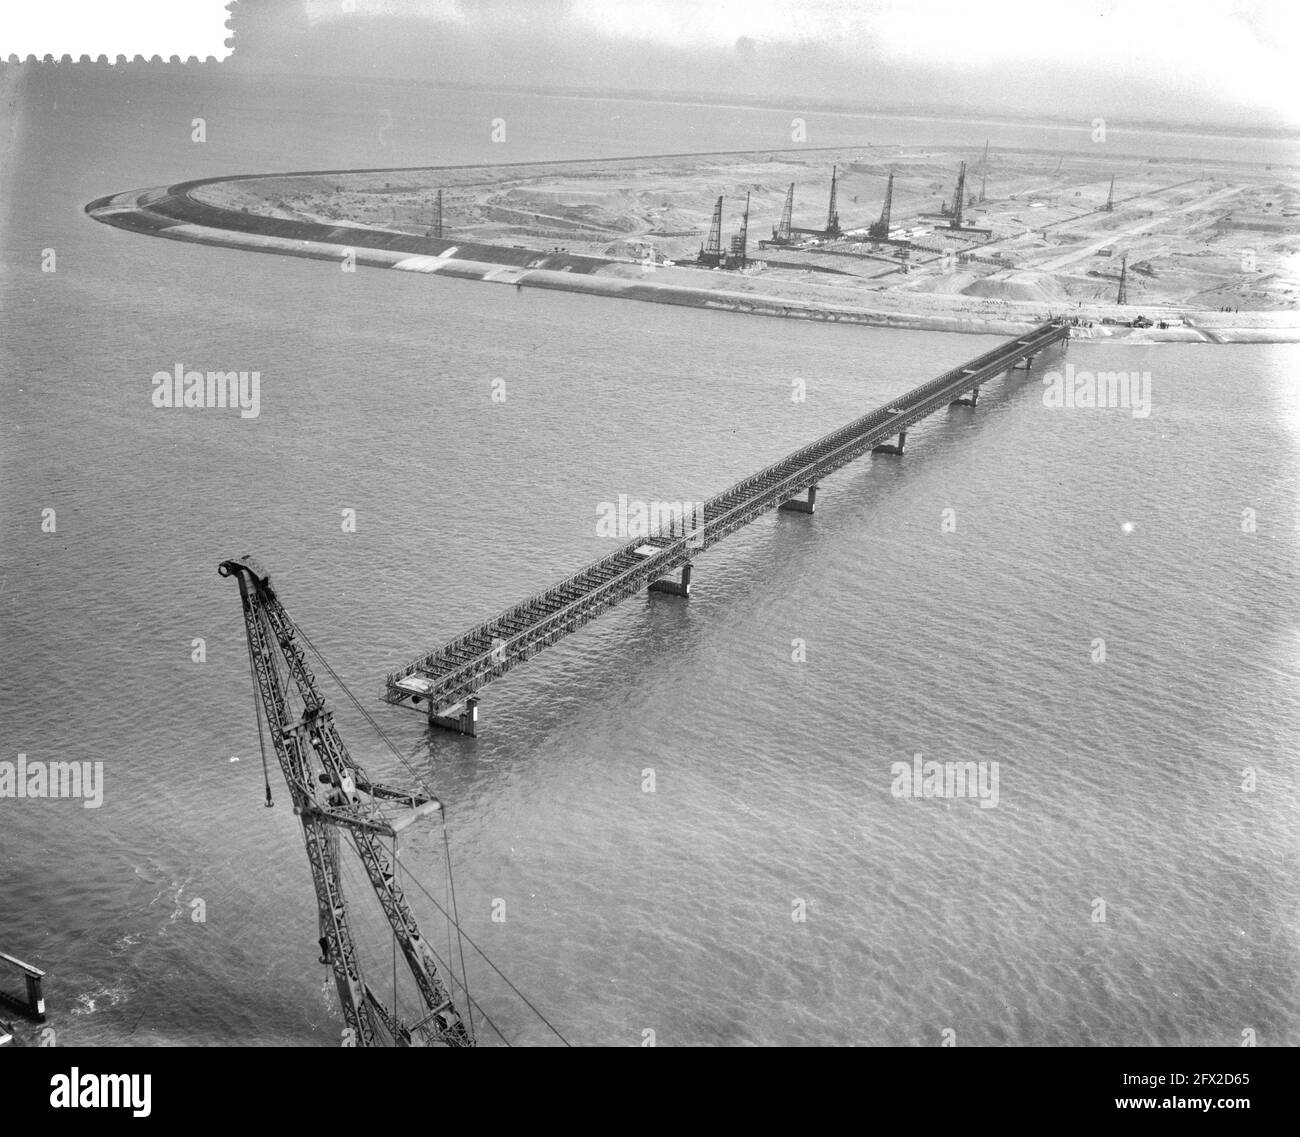 Aerial photographs of the Bailey Bridge under construction in the Haringvliet, August 14, 1959, The Netherlands, 20th century press agency photo, news to remember, documentary, historic photography 1945-1990, visual stories, human history of the Twentieth Century, capturing moments in time Stock Photo